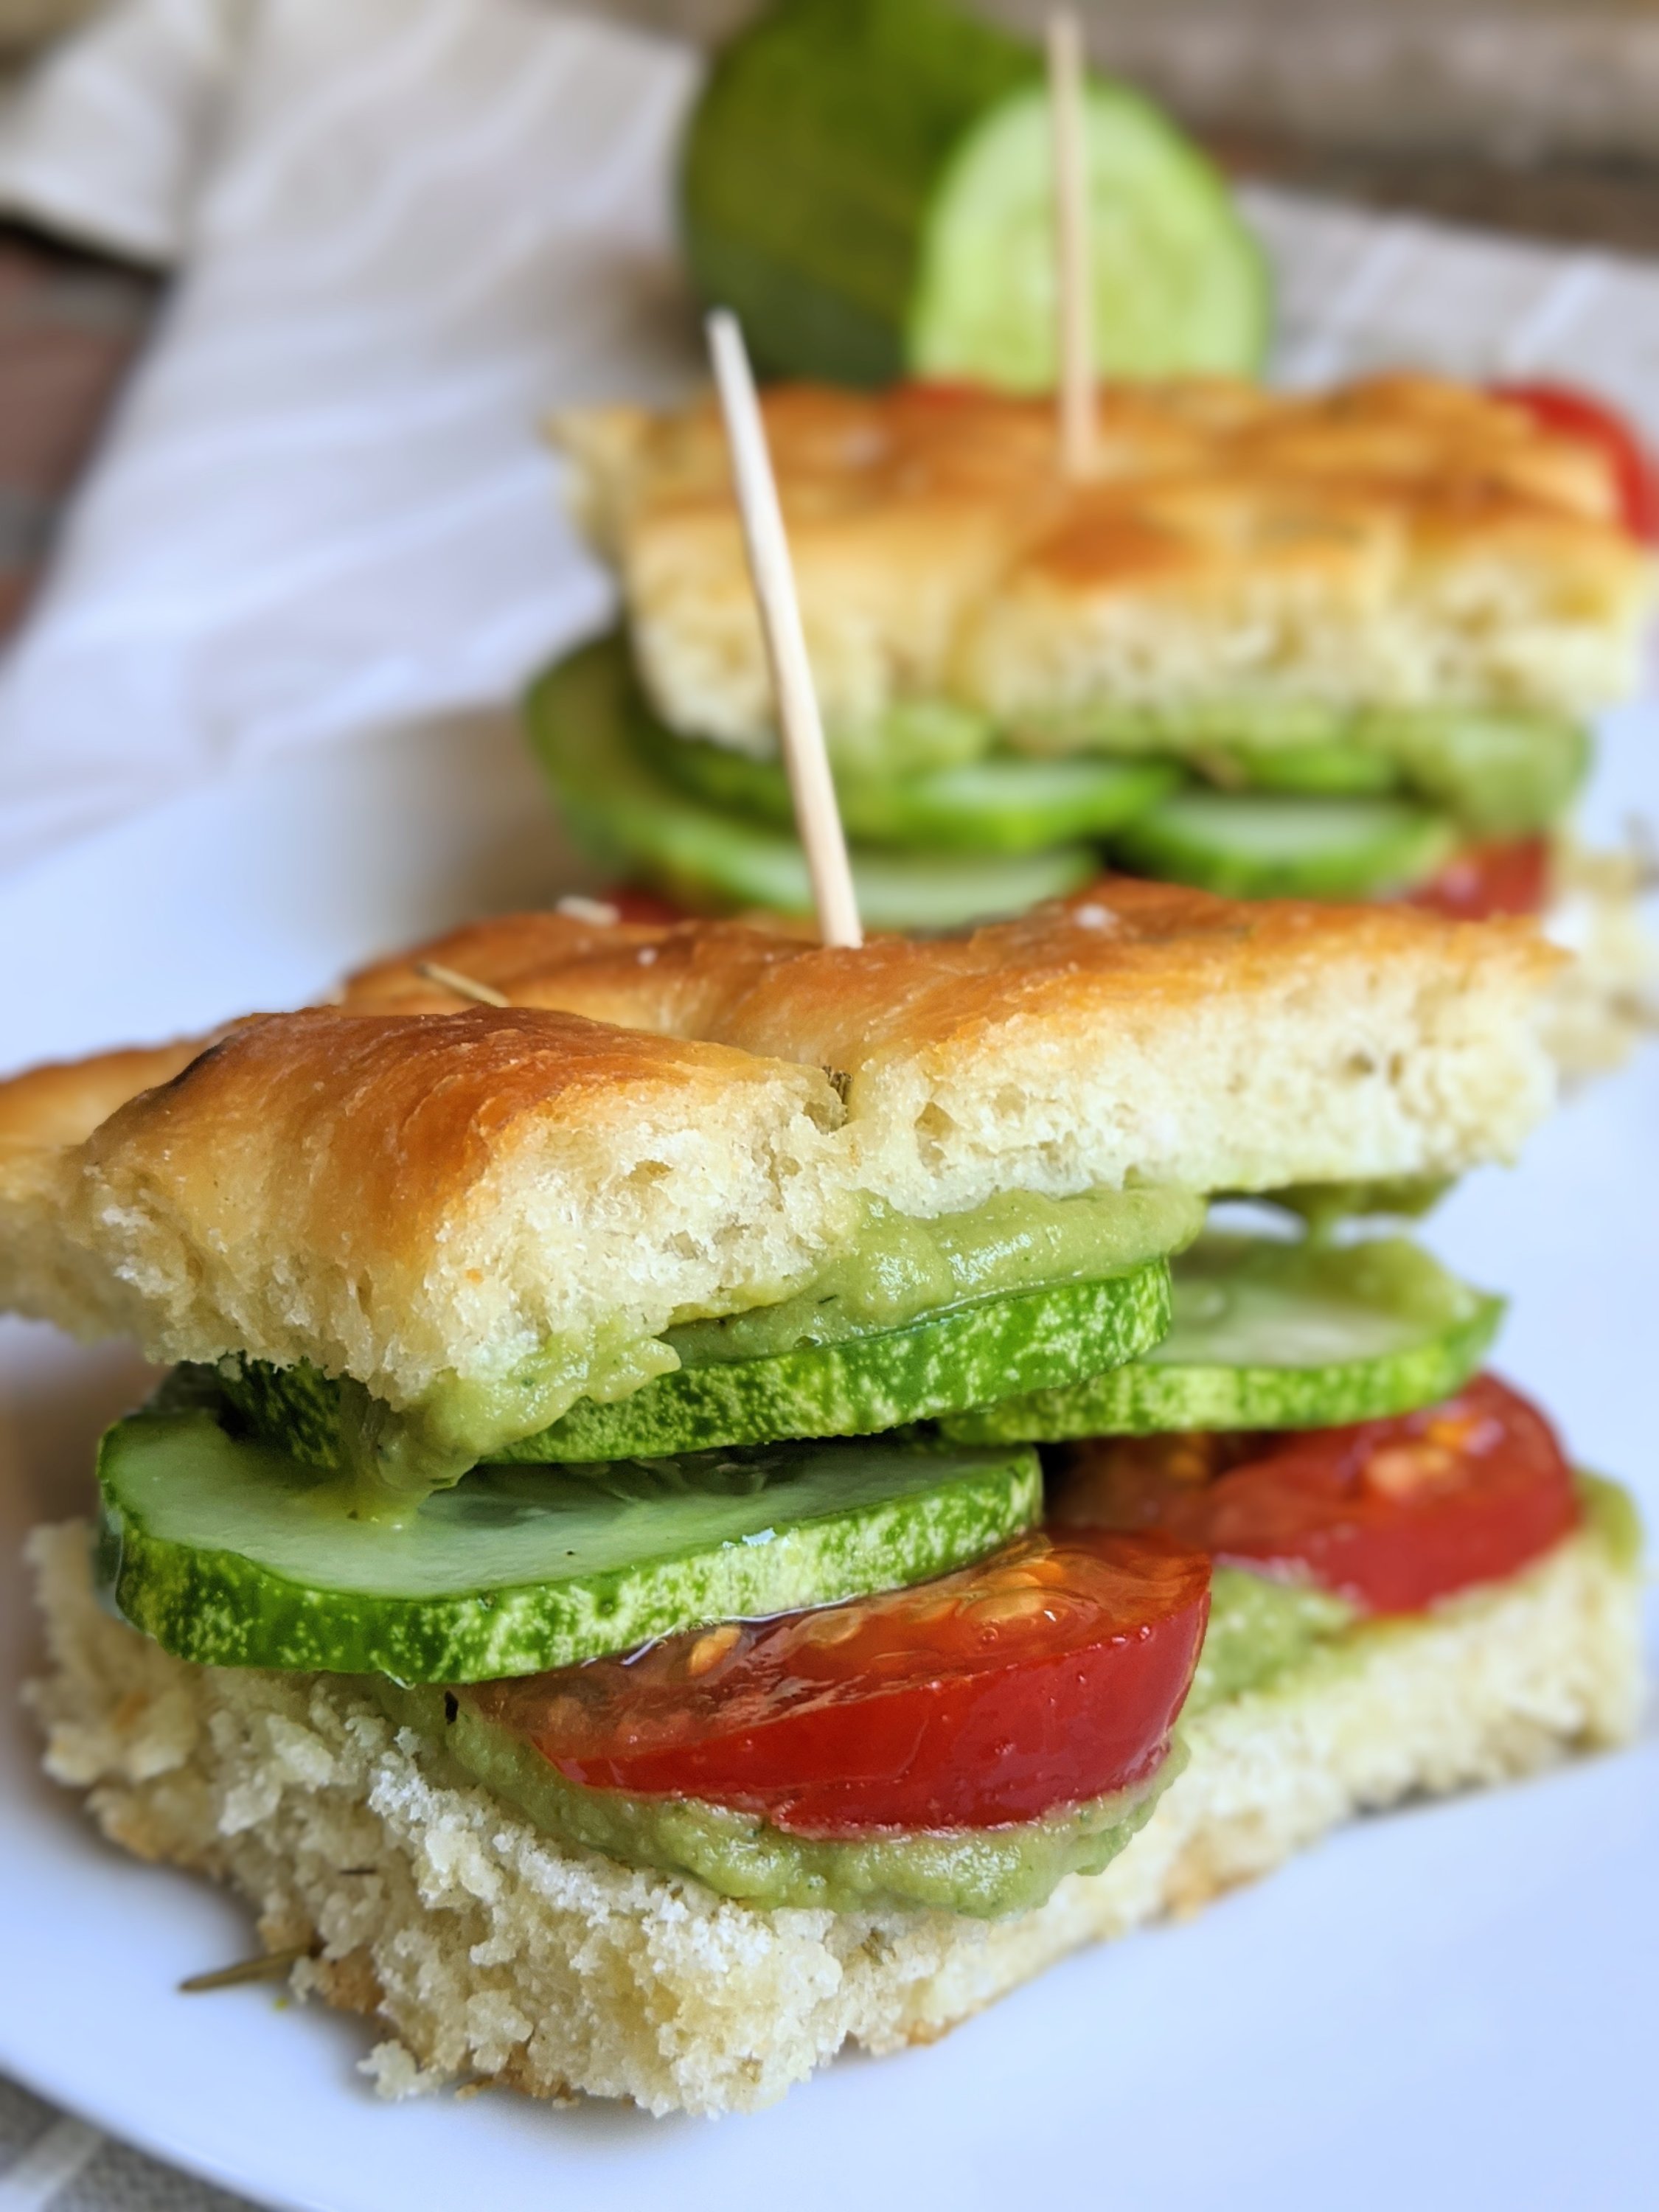 focaccia sandwich recipe no cook summer sandwich recipes for garden tomatoes and cucumbers with homemade hummus recipes